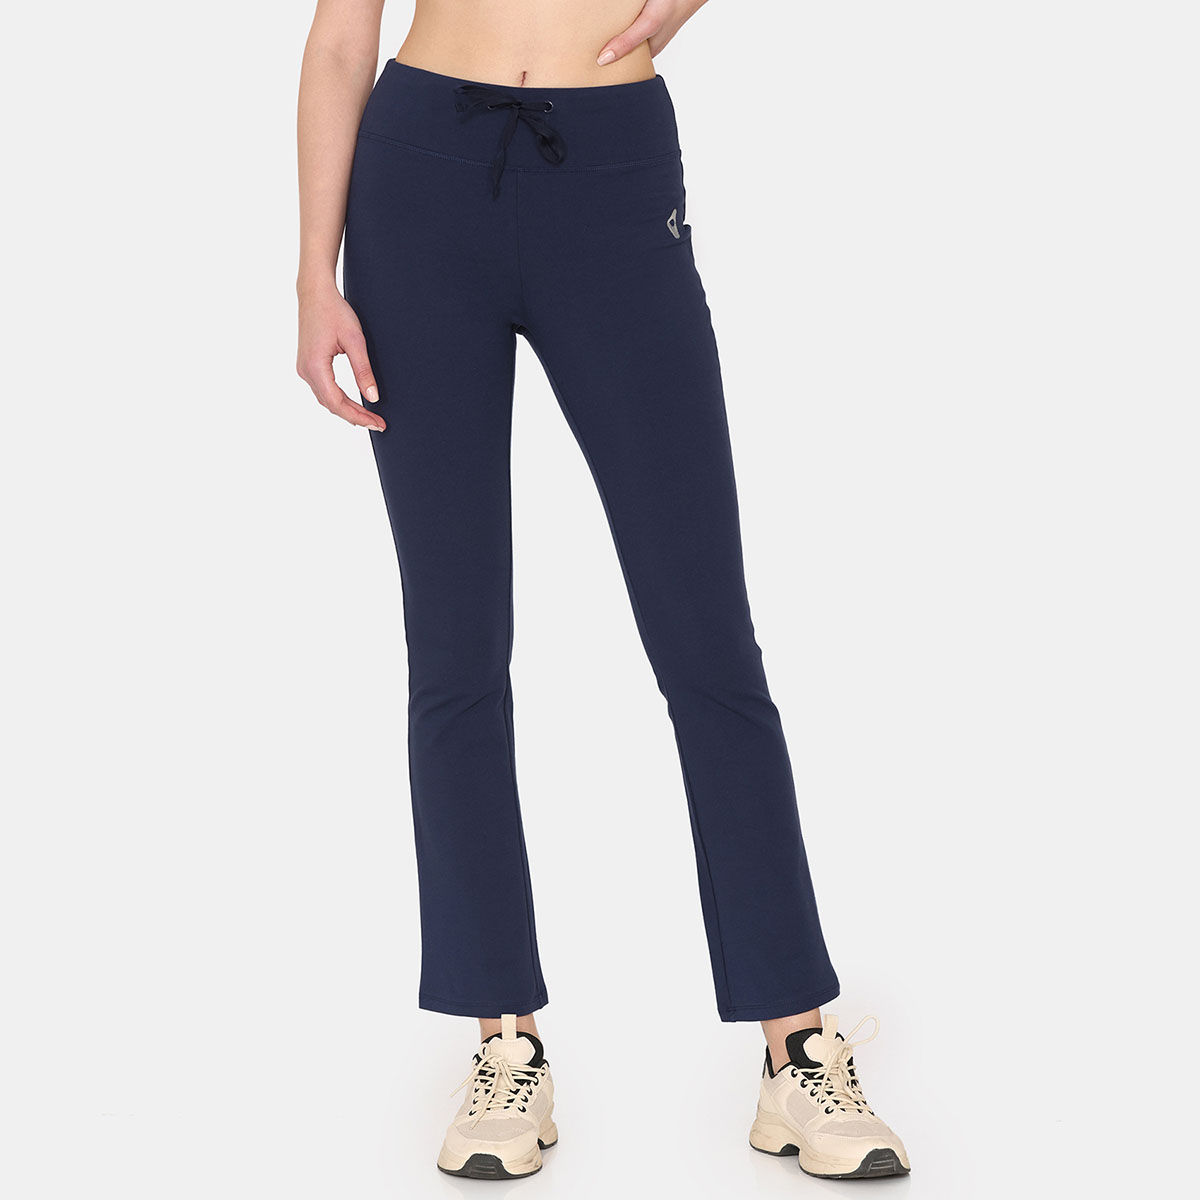 Rosaline By Zivame Striped Women Purple Track Pants - Buy Rosaline By Zivame  Striped Women Purple Track Pants Online at Best Prices in India |  Flipkart.com